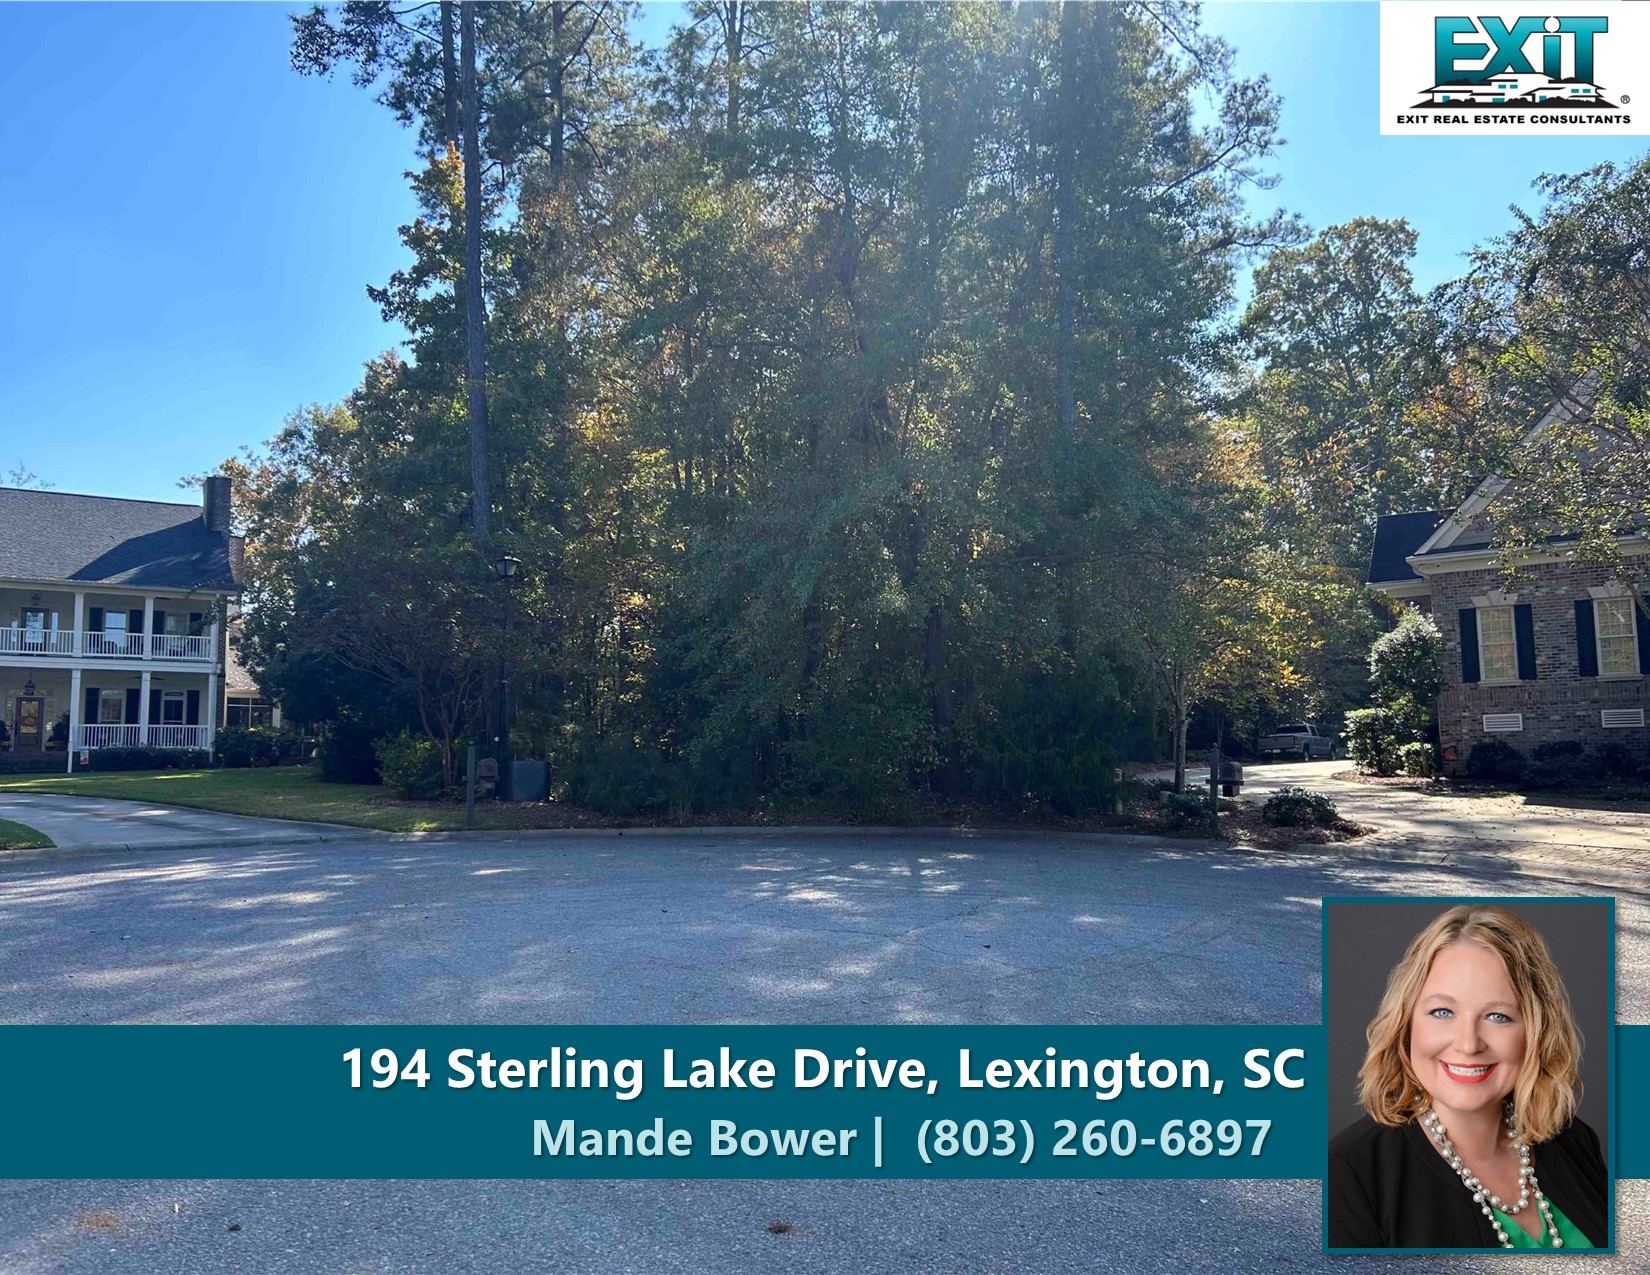 Just listed in Sterling Lake